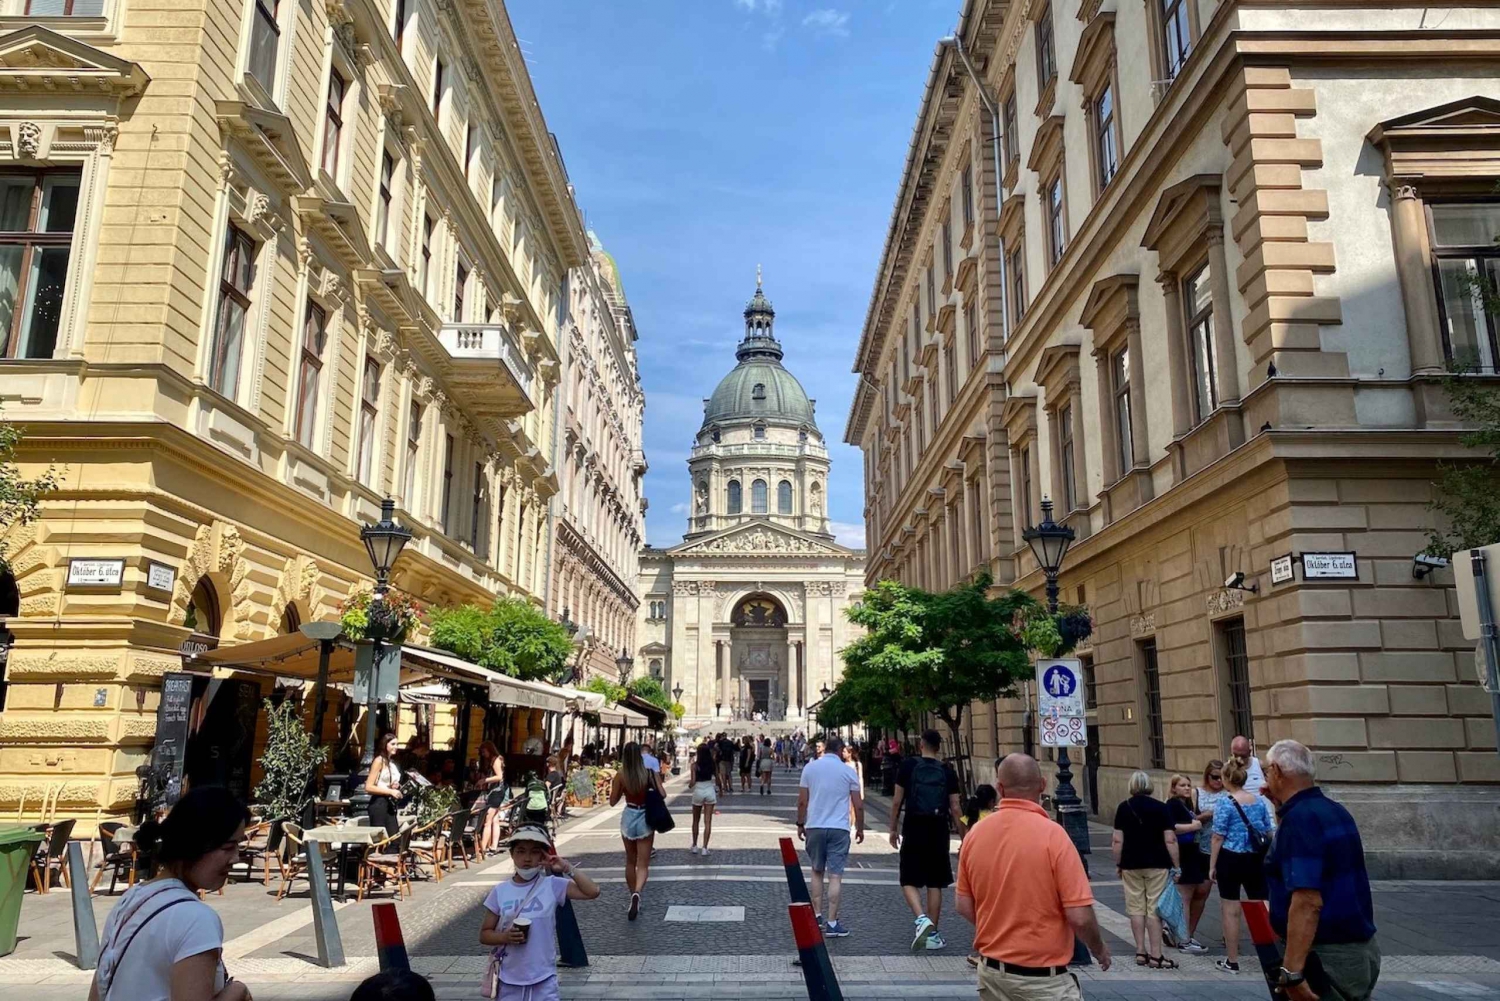 Budapest: Downtown Budapest Smartphone Audio Guide